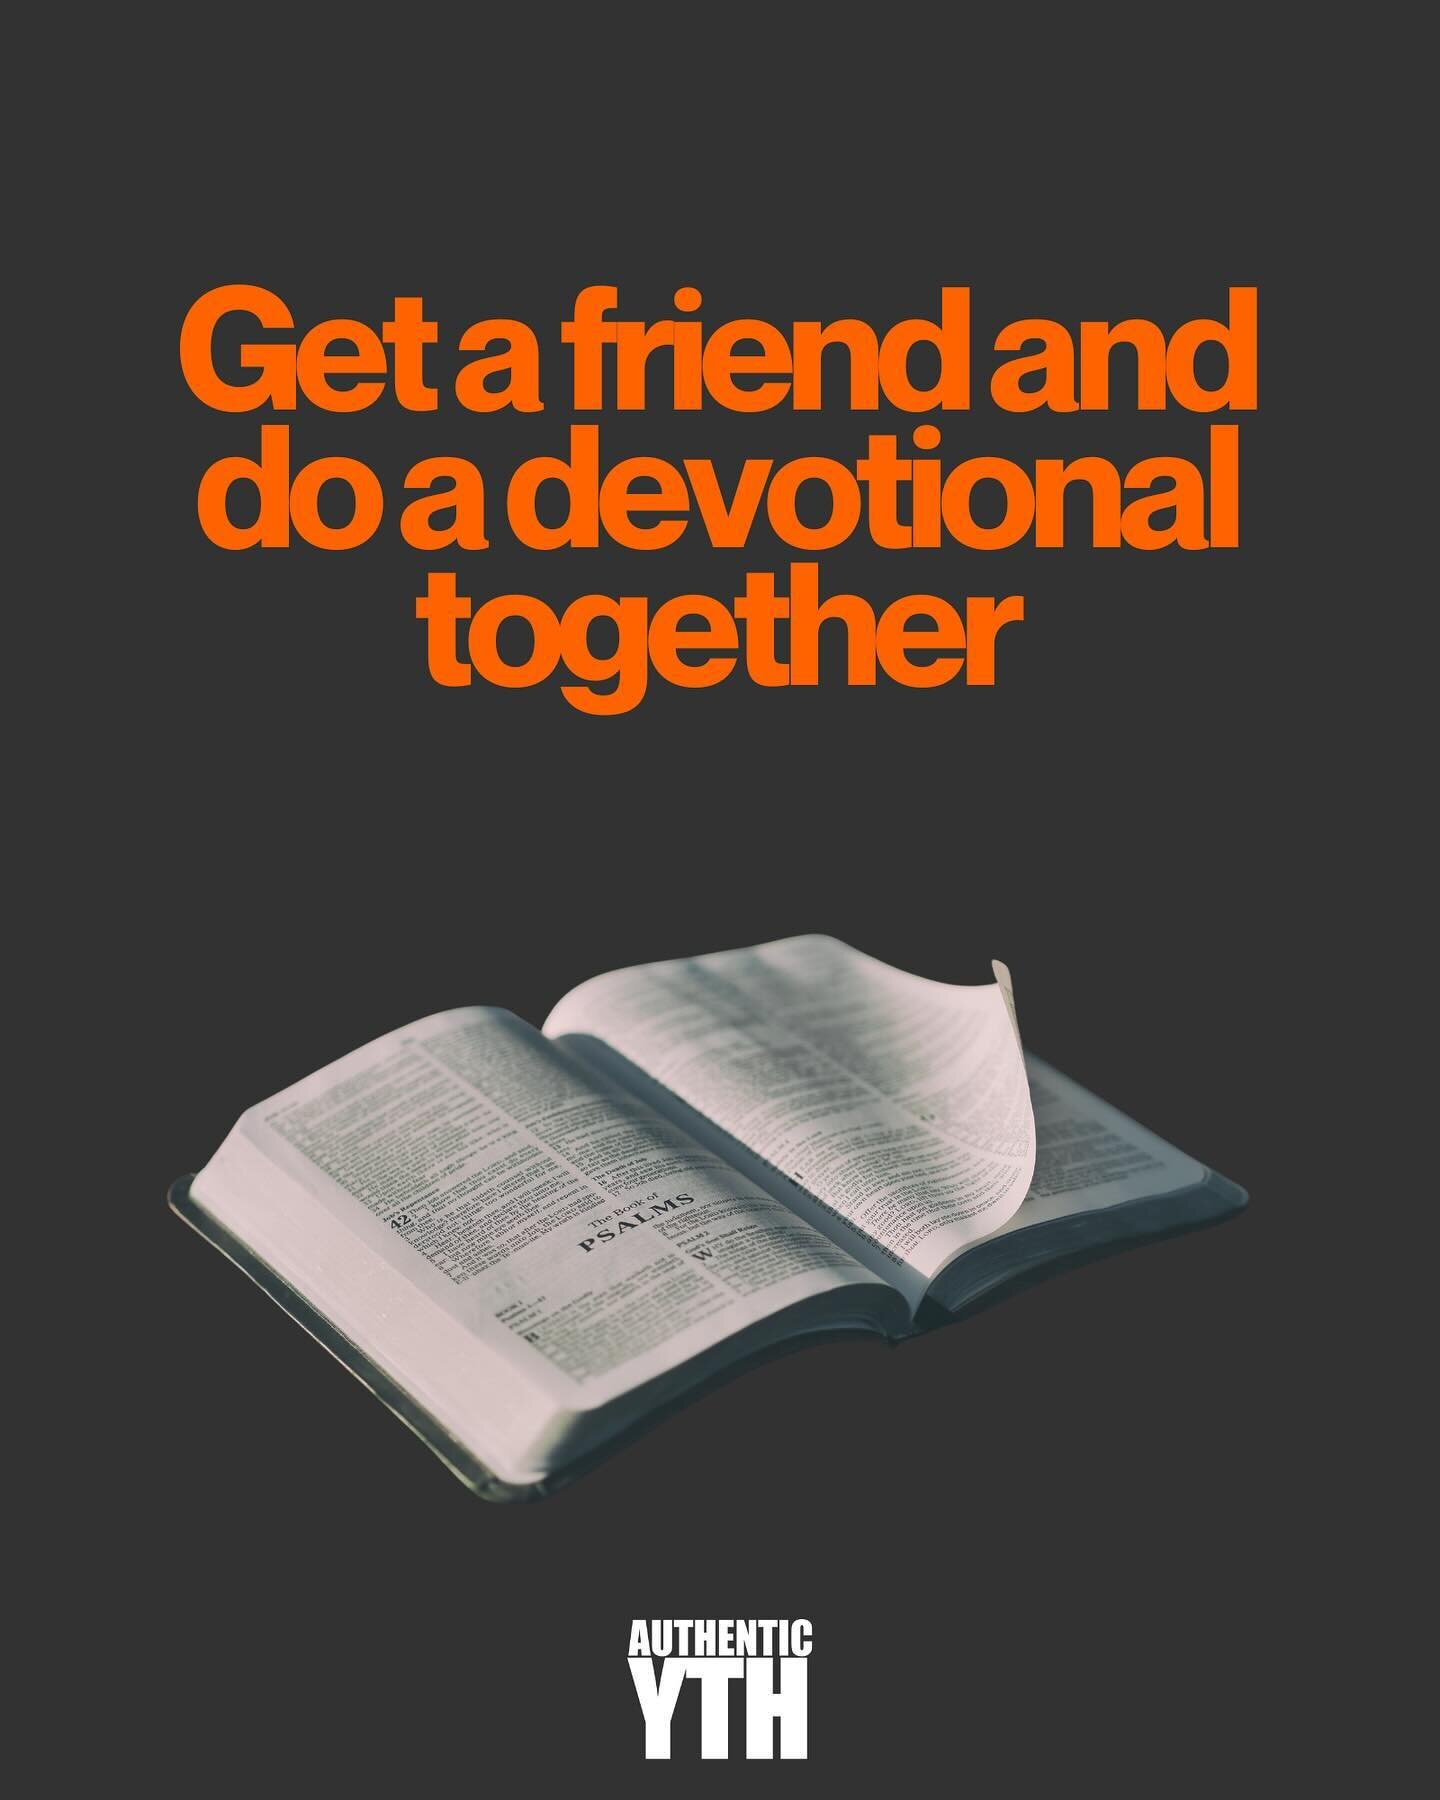 There may not be YTH tomorrow night BUT&hellip;

The anointing and word of God can still move in your homes. Get a friend on ft, discord, zoom, or in person, and study God&rsquo;s word together.

See how He can speak to you and through you! See you n